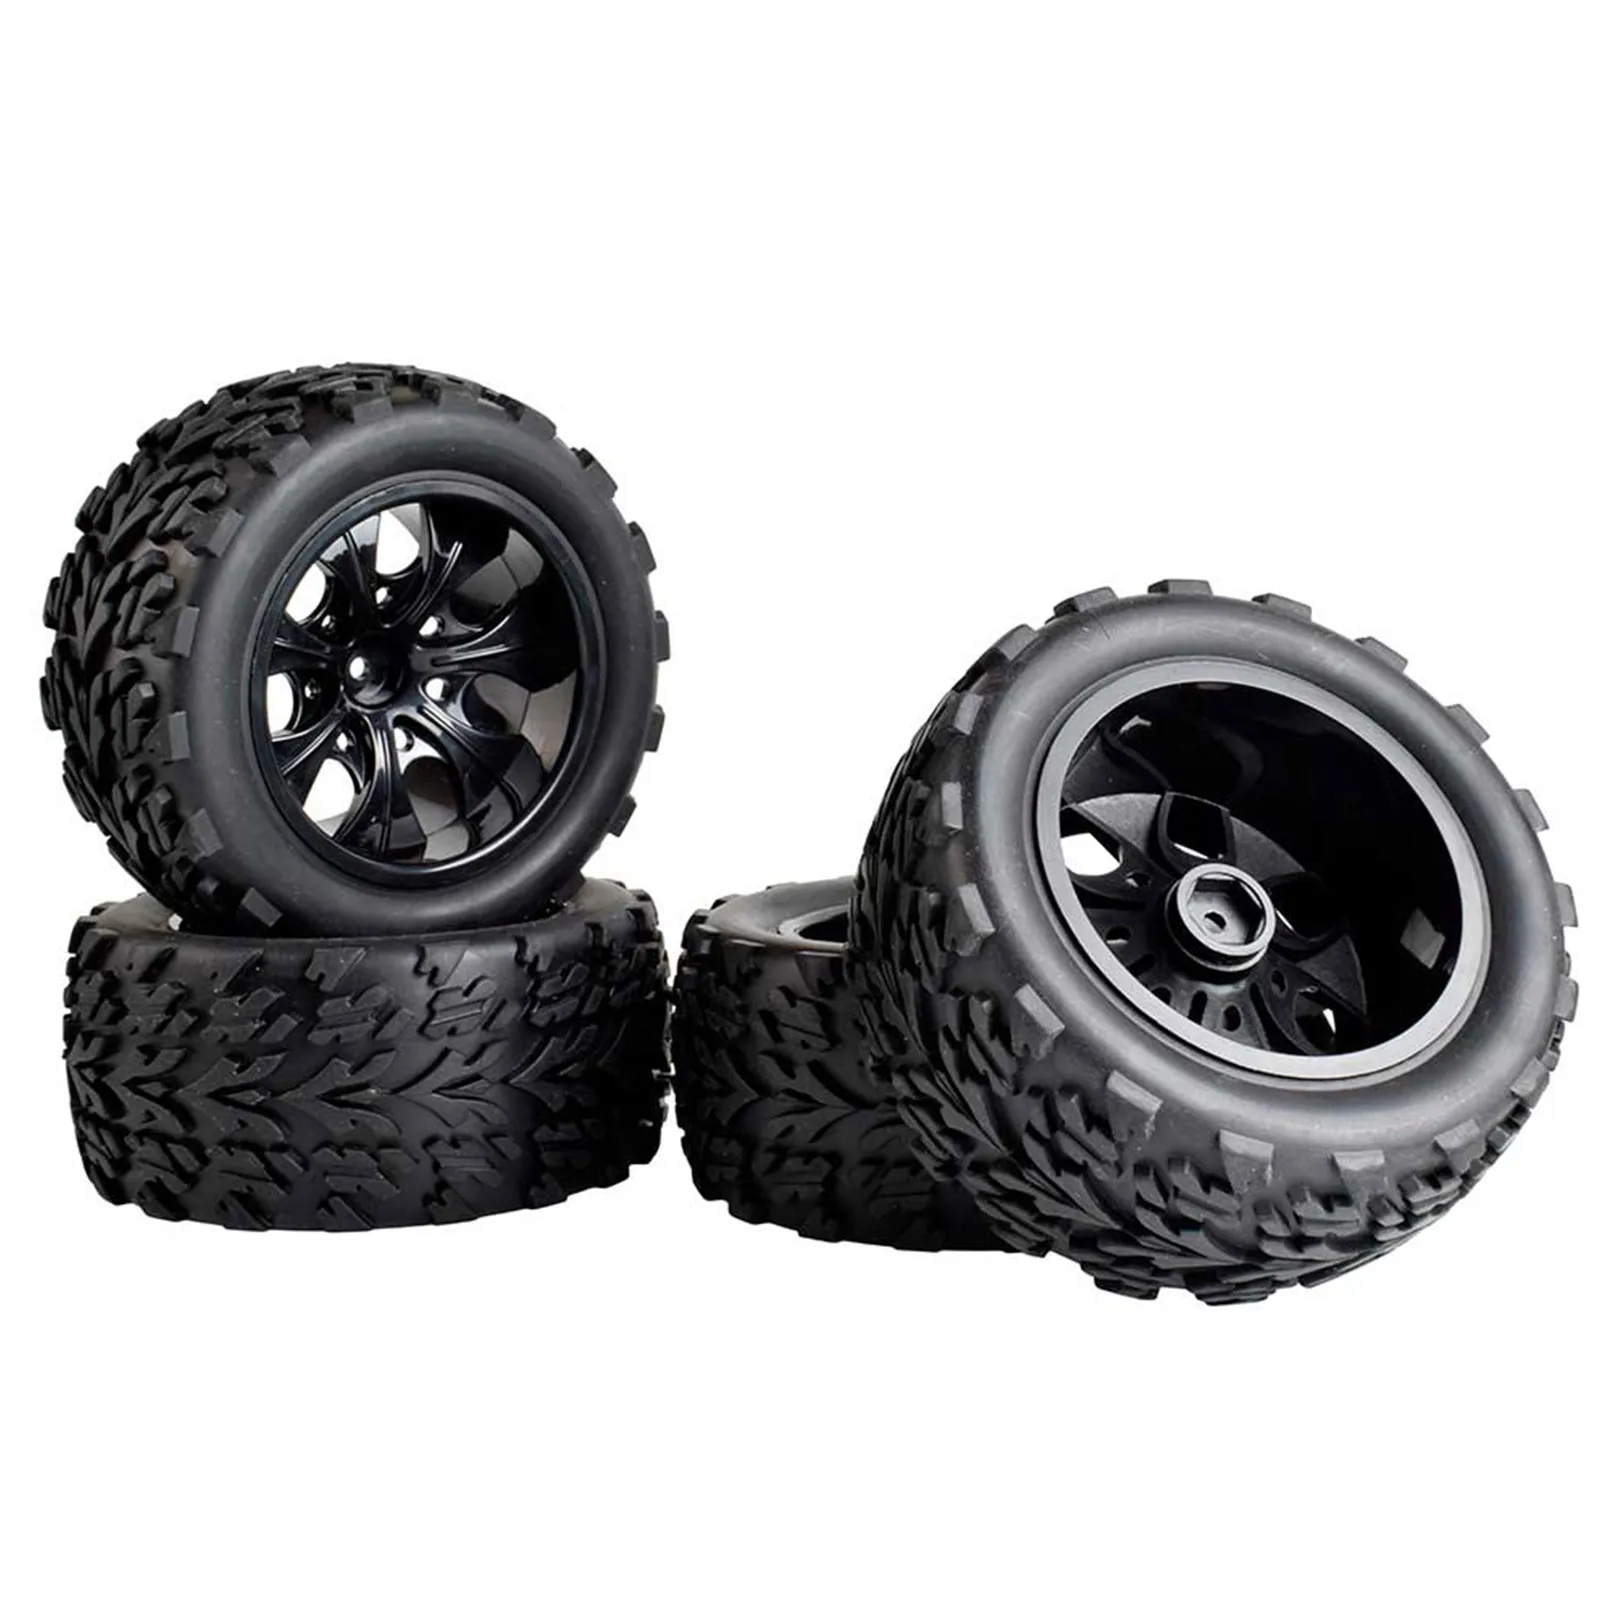 

RC Off-Road Tires 1/10 RC Tires And Wheels 4Pcs Black Rubber Tyres For 1:10 Scale Off-Road Vehicles Foam Inserts Wear-Resistant